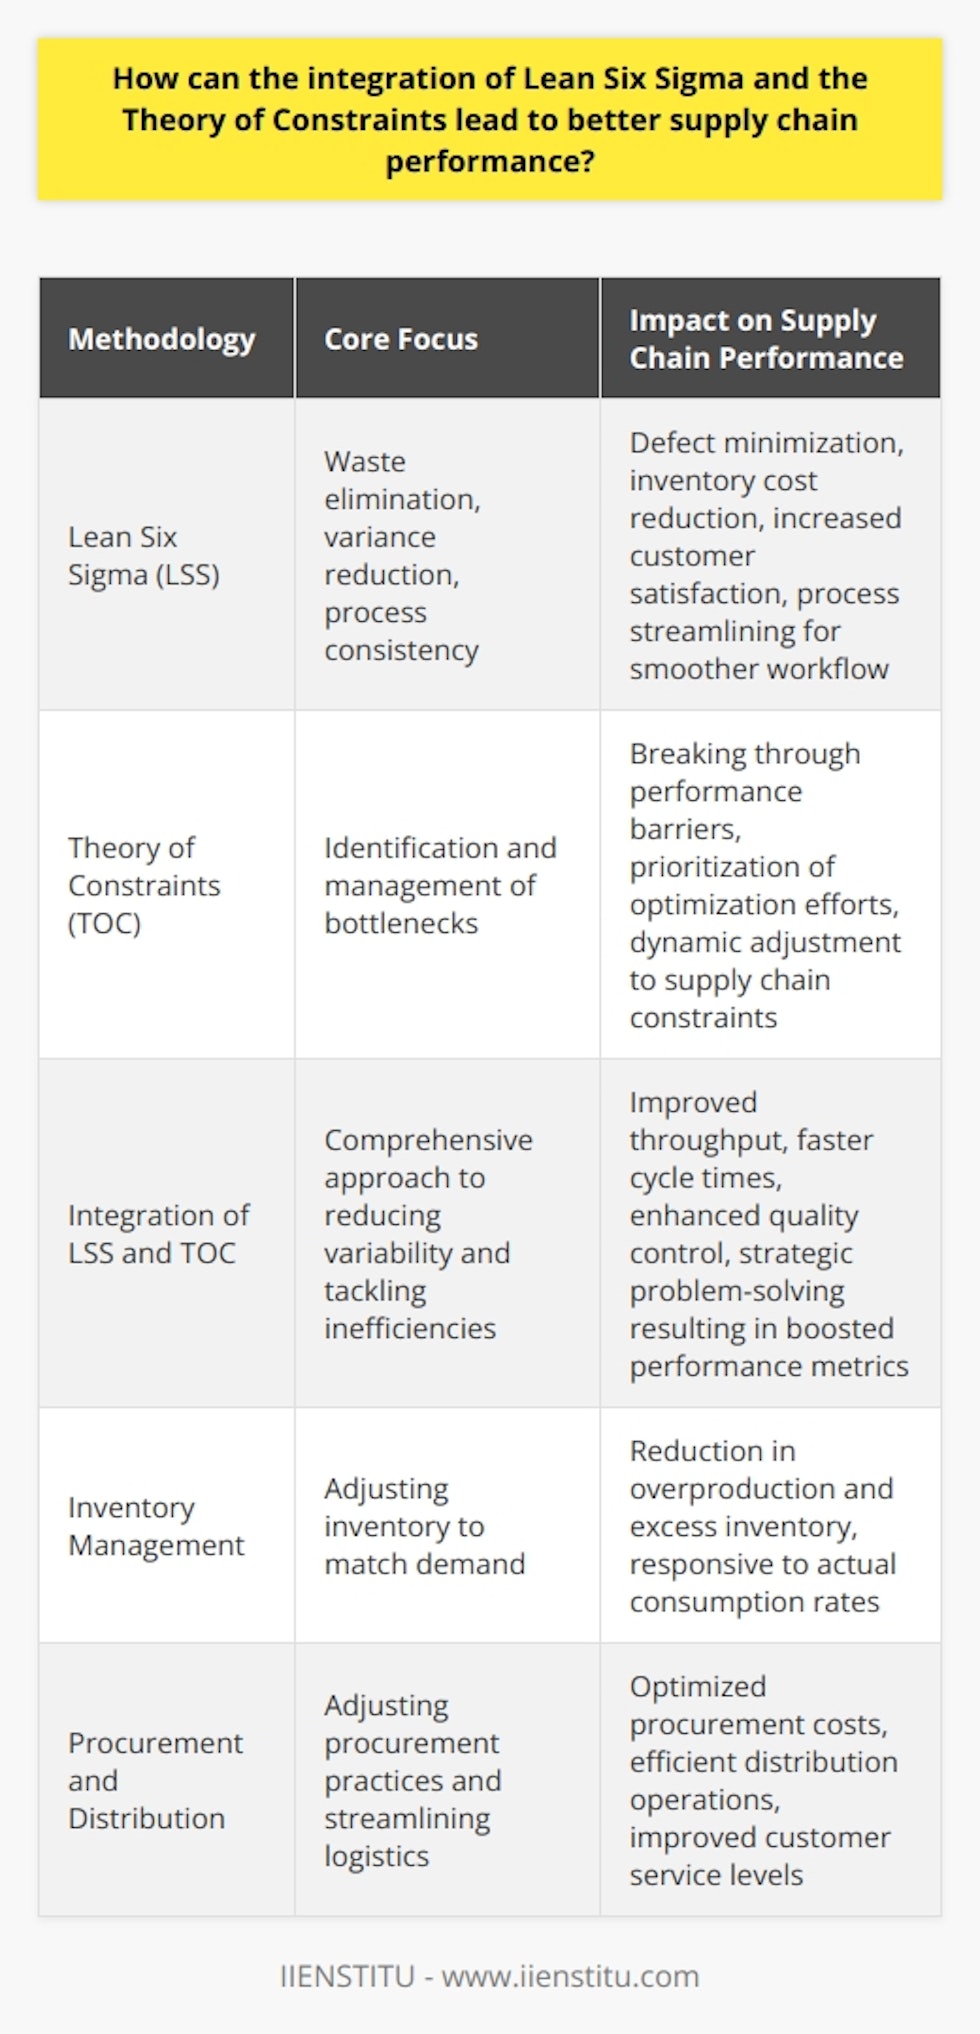 The synergistic combination of Lean Six Sigma (LSS) and the Theory of Constraints (TOC) can markedly boost supply chain performance. Integrating these methodologies harnesses their individual strengths to create a unified approach to supply chain optimization.Lean Six Sigma intensifies the focus on waste elimination and variance reduction, enhancing process consistency and efficiency. Applying the precision of Sigma levels to supply chain activities leads to the minimization of defects and overproduction, which, in turn, cuts down inventory costs and increases customer satisfaction. Lean techniques can also streamline processes to facilitate a smoother flow of goods and information along the supply chain.On the other hand, TOC, with its pinpoint focus on the most significant bottlenecks, empowers businesses to break through performance barriers. By employing the TOC 'Five Focusing Steps', companies can dynamically adjust their approach to constraint management. By methodically Identifying, Exploiting, Subordinating, Elevating, and preventing Inertia with respect to constraints within the supply chain, optimization efforts can be prioritized effectively.When LSS and TOC are interwoven, businesses can tackle inefficiencies with a clear sense of direction. The constraint-centric focus of TOC dovetails with the exhaustive, data-driven approach of LSS to reduce variability and uncertainty. This strategic meld can produce a cascading effect on supply chain performance, where removing one constraint opens up areas to apply Lean Six Sigma improvements further.Whether it’s refining inventory levels to match the true demand, adjusting procurement practices, or streamlining logistics and distribution, integrating LSS and TOC offers a robust framework. This dual approach elevates problem-solving from reactive patchwork fixes to a strategic endeavor that systematically advances performance metrics.Real-world applications of this dual strategy often manifest in improved throughput, faster cycle times, and enhanced quality control—all critical components of successful supply chain management. Organizations may witness a direct correlation between the implementation of these combined strategies and elevated ROI due to lower operational costs and improved customer experiences.In conclusion, employing an integrated LSS and TOC strategy in supply chain management accelerates the journey towards operational excellence. It harnesses the proactive identification and resolution of constraints through TOC, alongside the meticulous waste reduction and quality improvement processes of LSS. The result is a heightened organizational agility, where supply chains become value-driven engines propelling a business toward sustainable success.